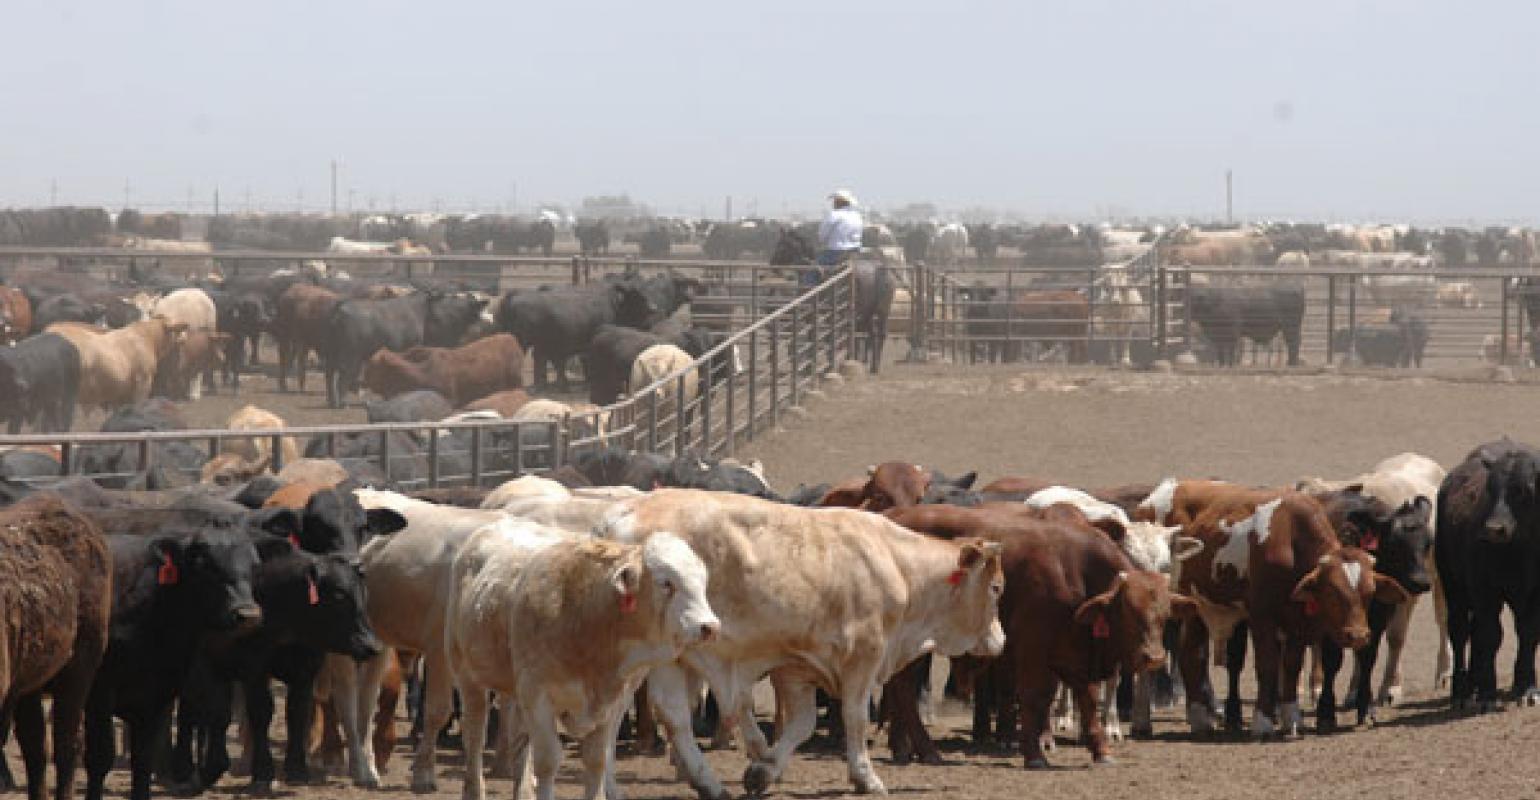 Dr. Derrell Peel Says Feedlots are Packed Full... for Now 